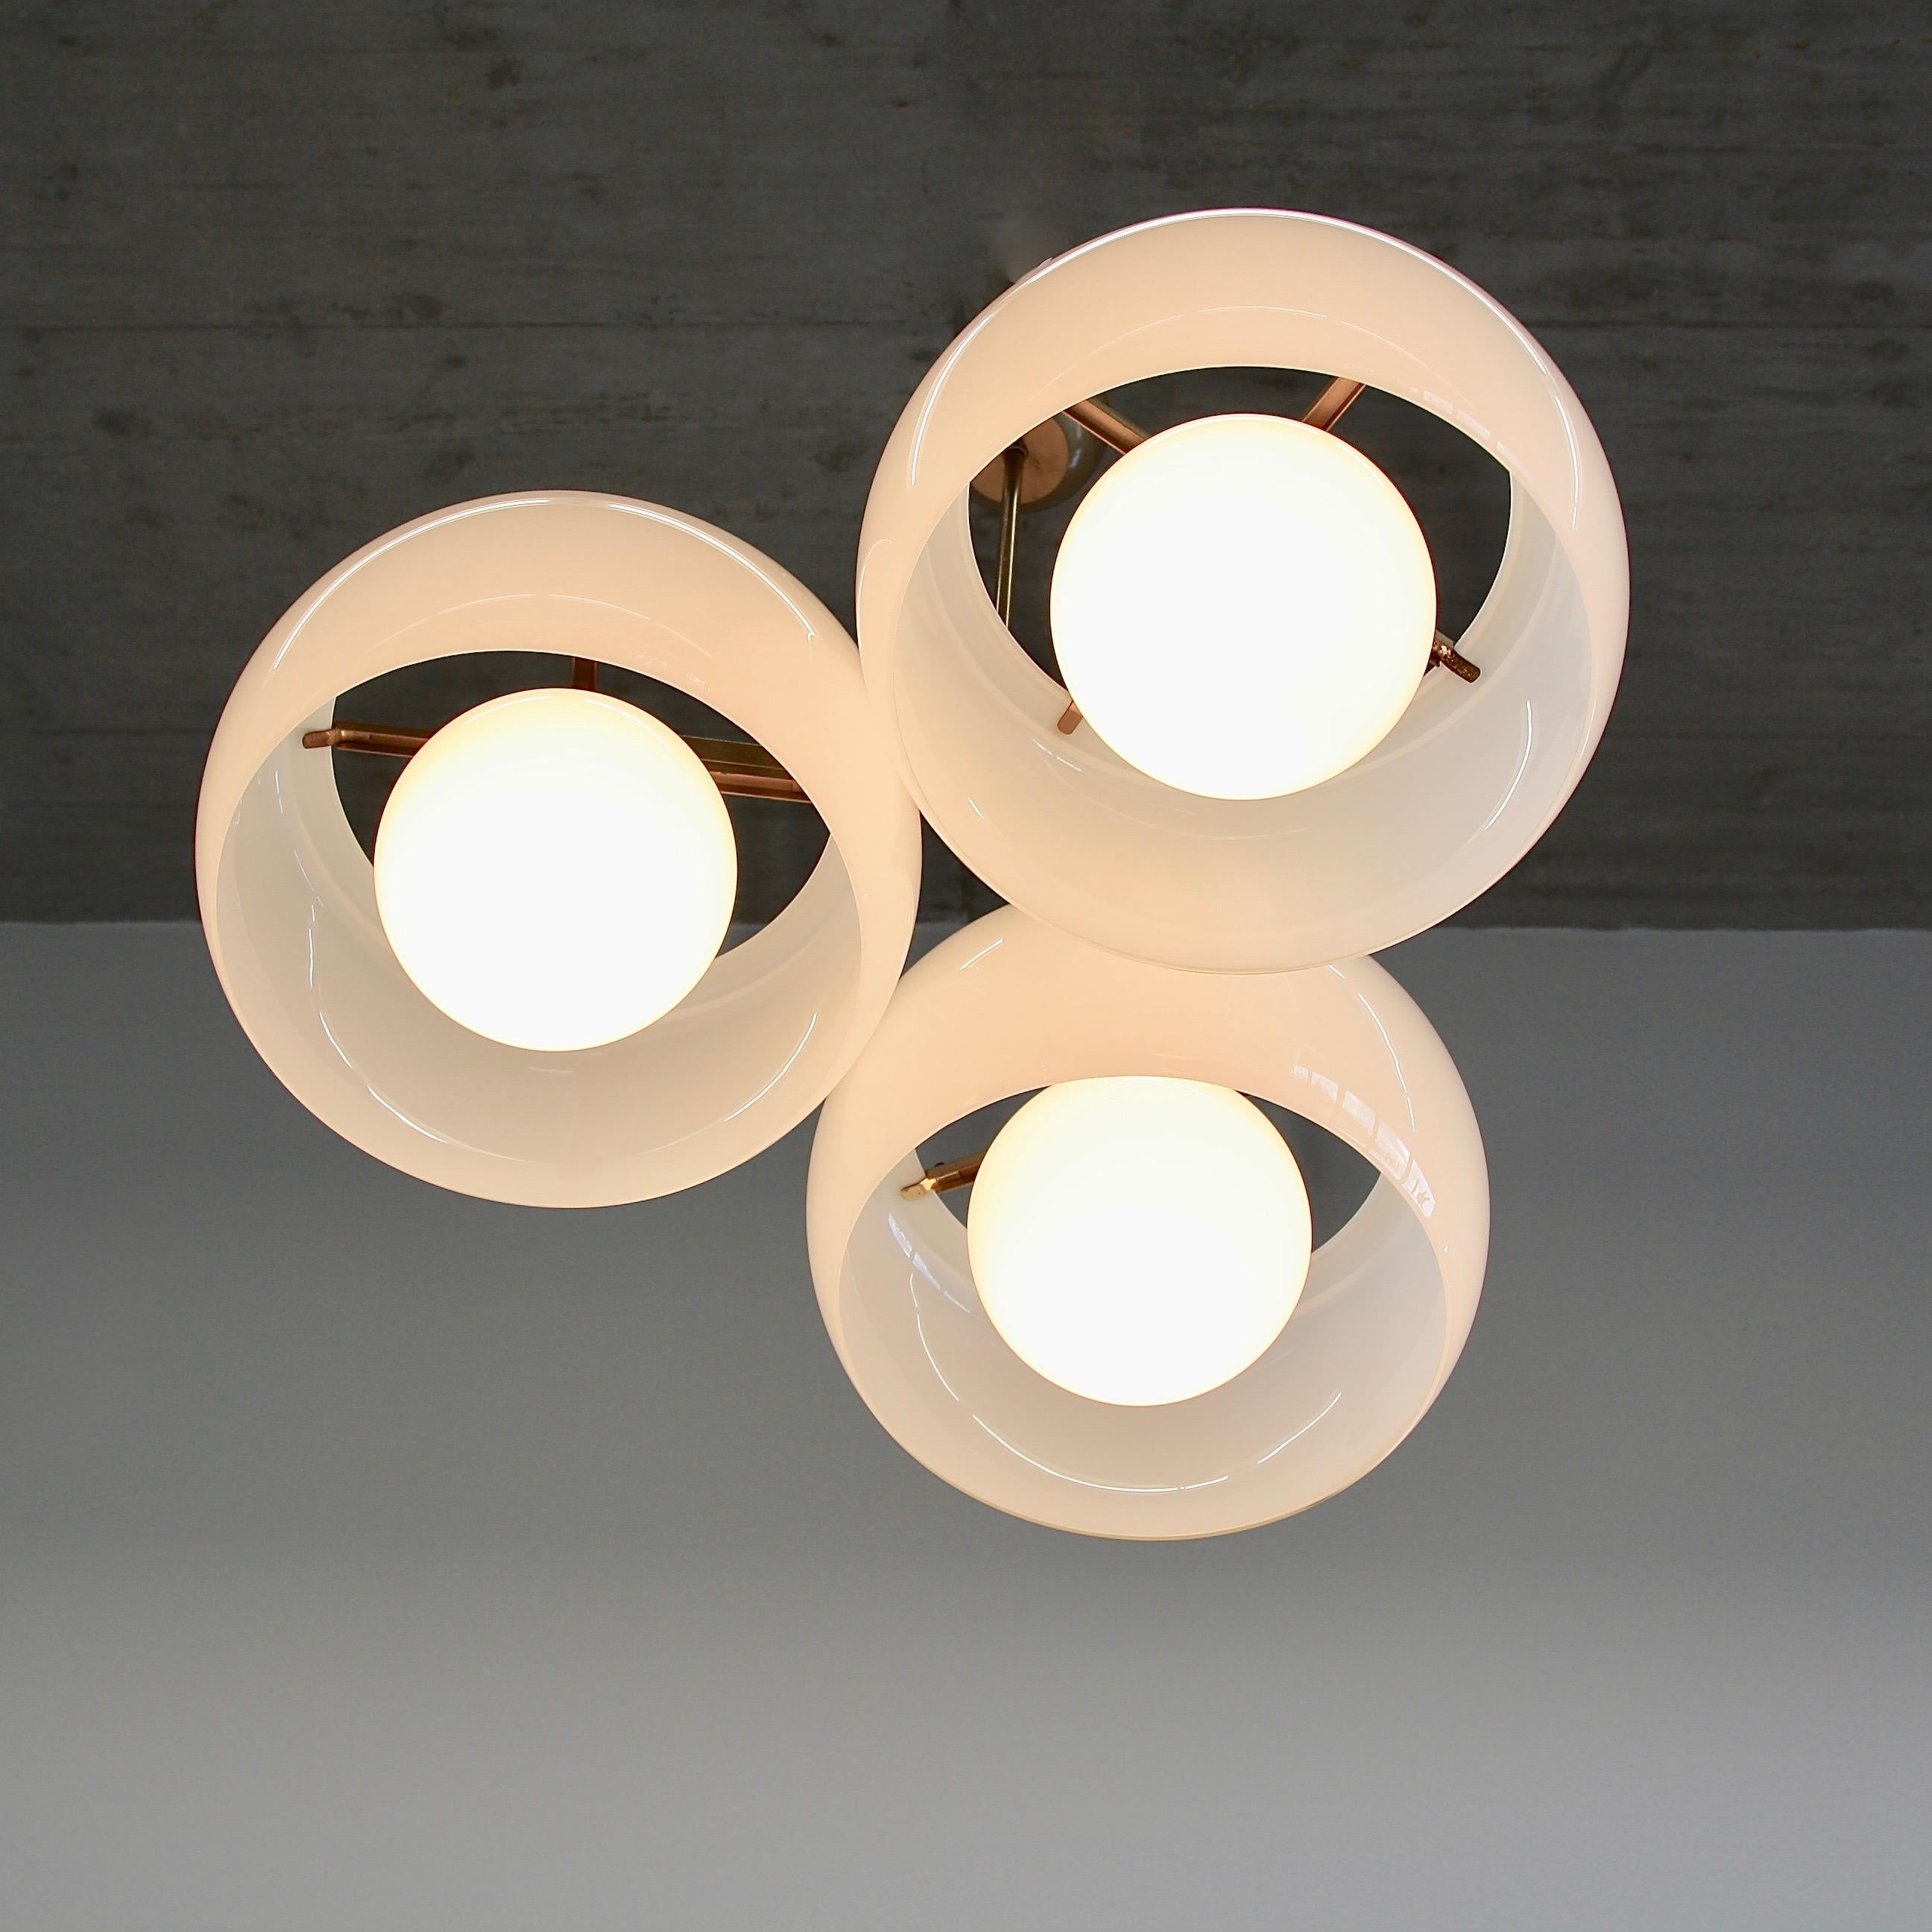 Ceiling lamp, designed by Vico Magistretti, Italy, Artemide, 1961.

The Triclinio ceiling lamp with 3 double diffuser glass shades. Opal glass and original bronzed metal structure.

Reference: Repertorio del Design Italiano, 2 vols. p 91,